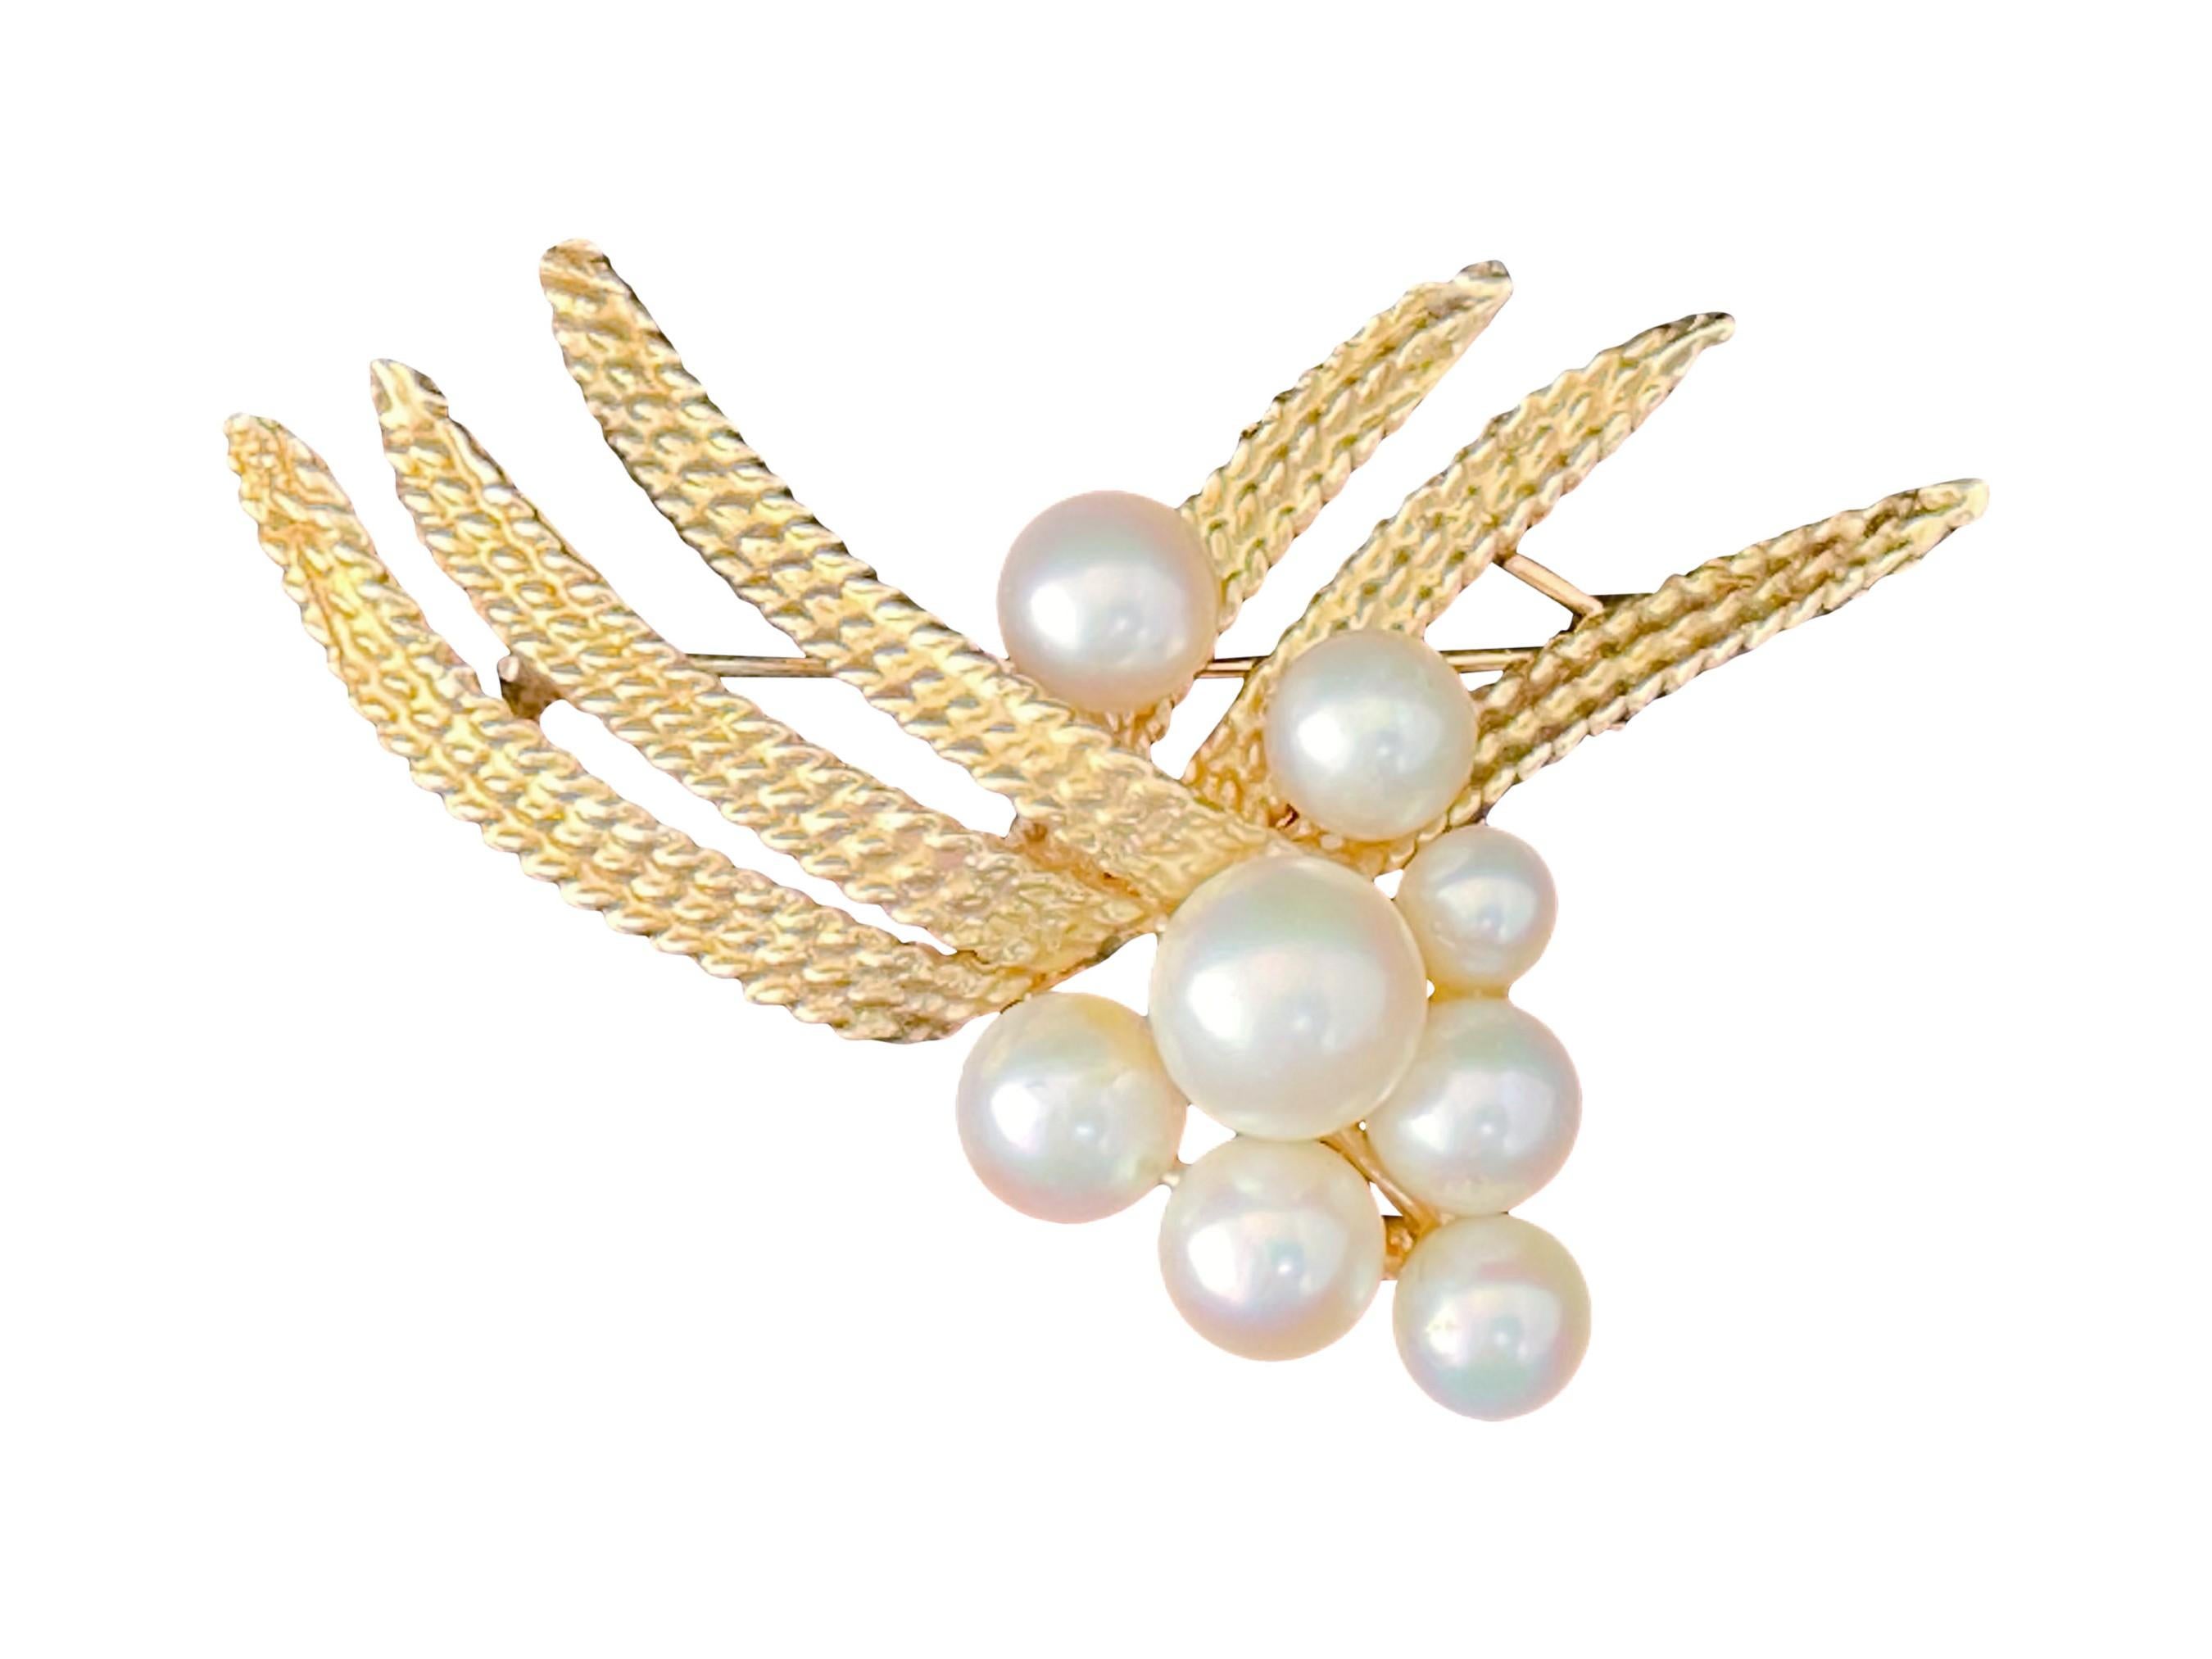 Gorgeous vintage 1970s solid 14k yellow gold pearl brooch. The brooch is composed of 8 saltwater Akoya pearls with good luster, varying from 4.5mm to 7.0mm in diameter. The pearls are clustered on 14k yellow gold in a foliate or wheat design.

The